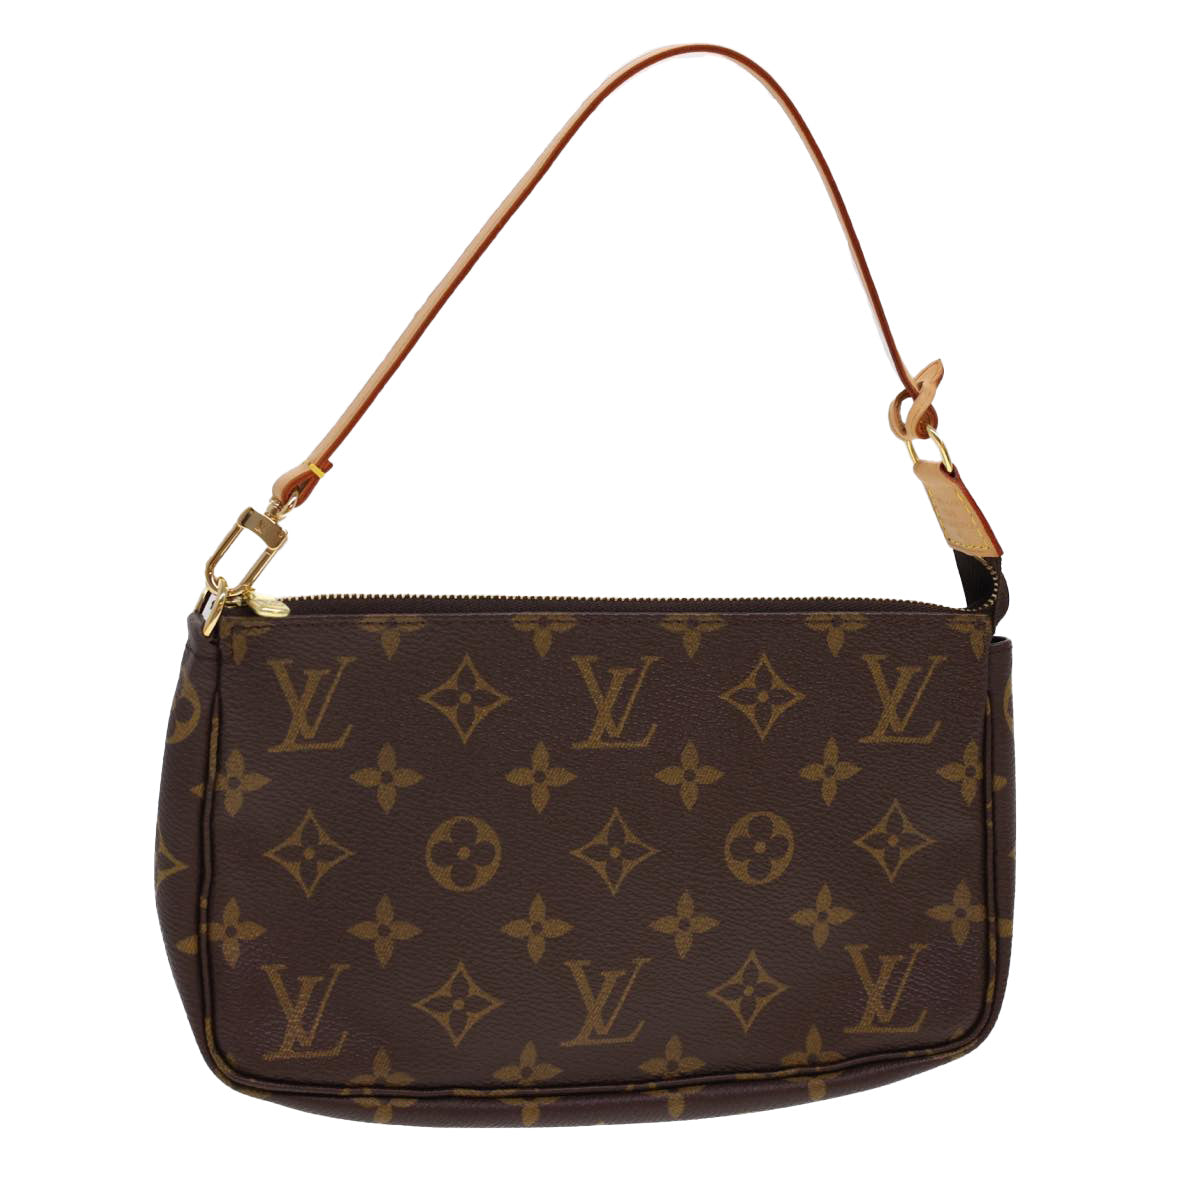 LV.Pouch